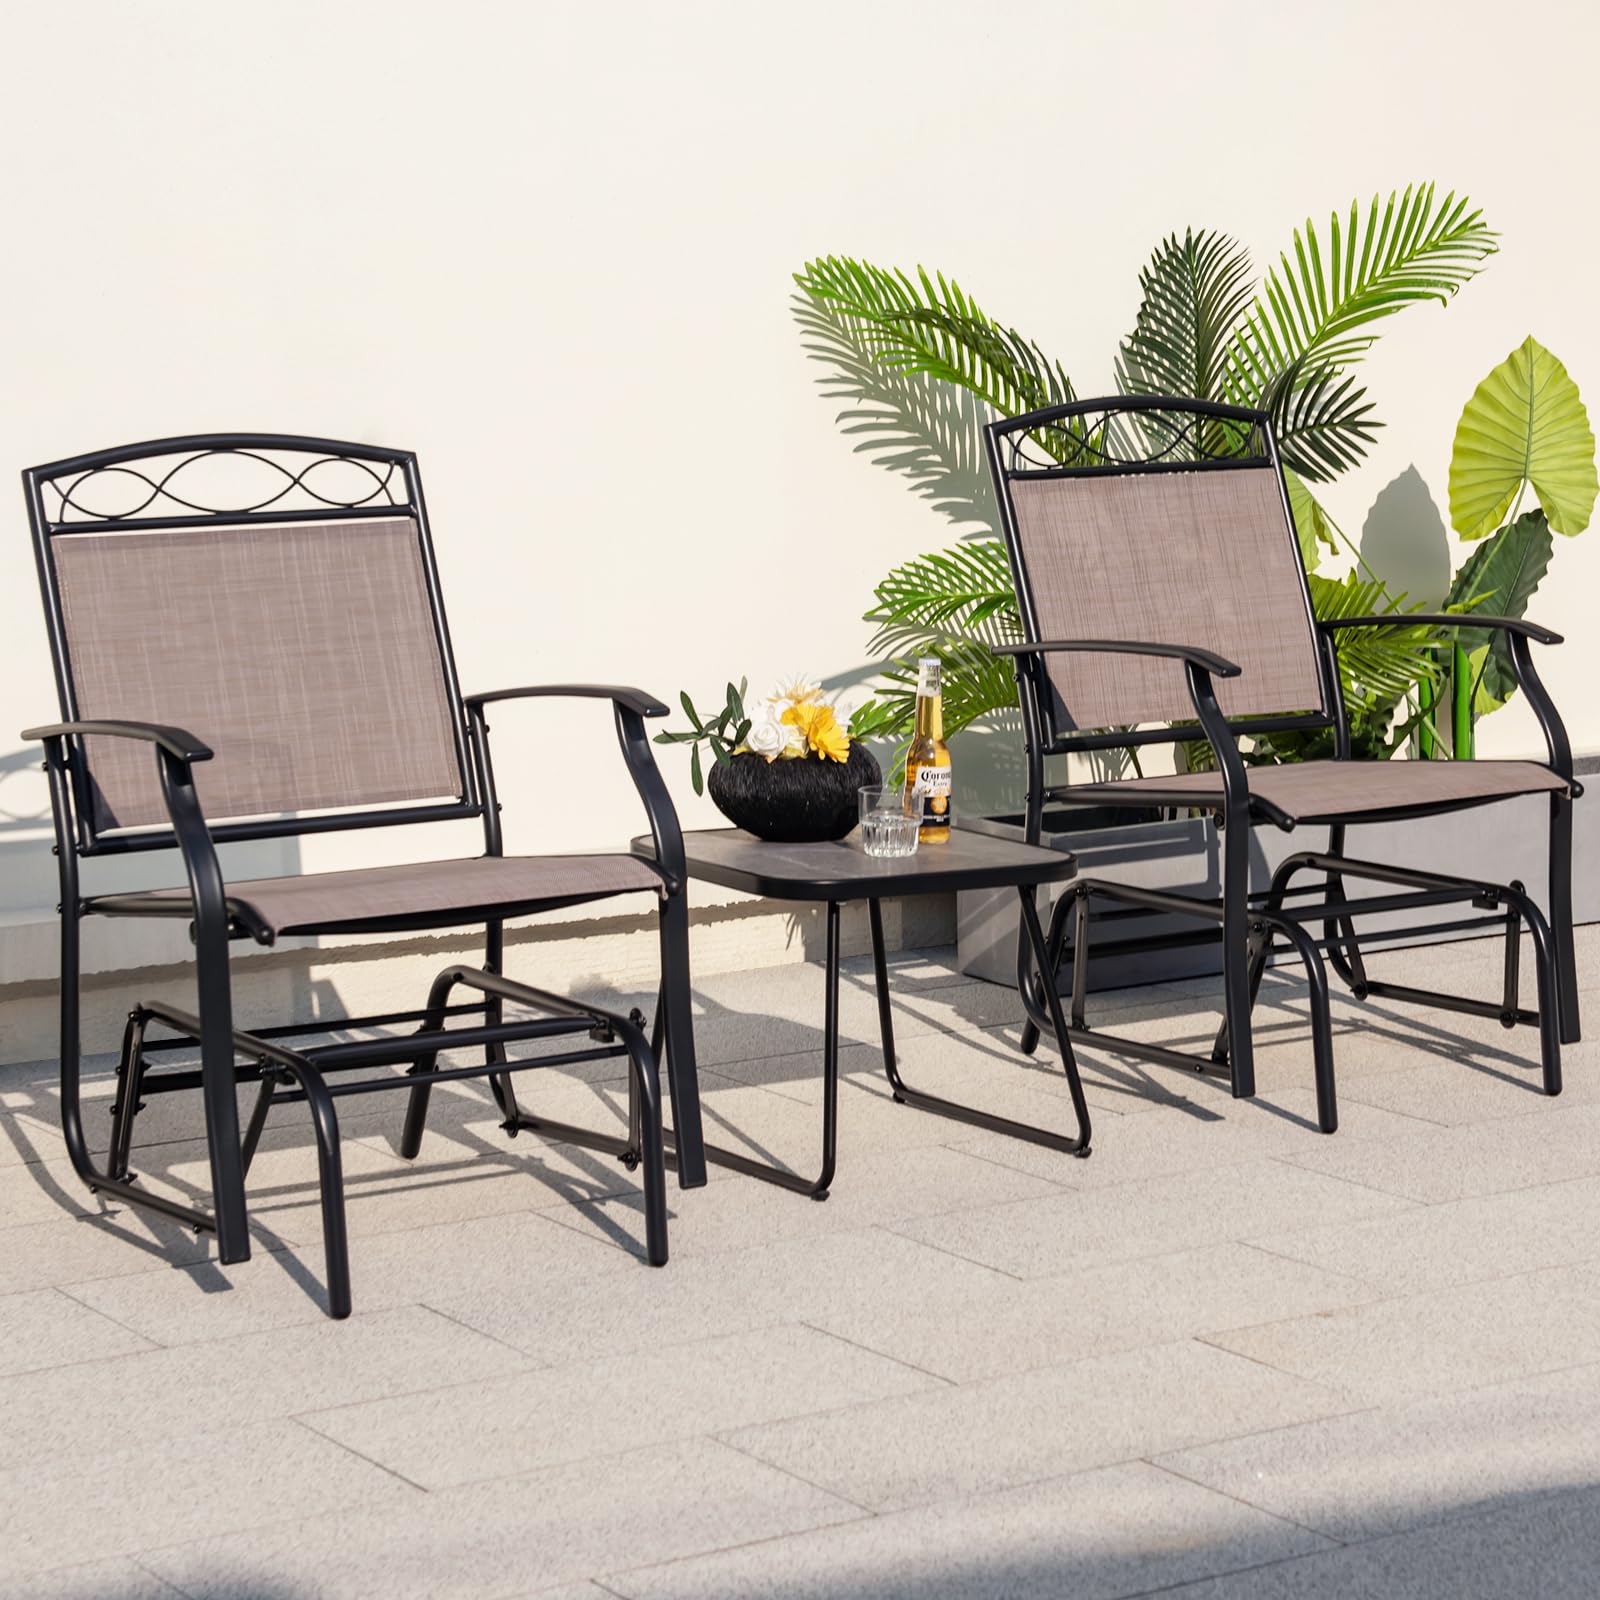 Giantex Patio Glider Chairs Set - 2 PCS Gliding Rocking Chairs w/Weather-Resistant Fabric, Heavy-Duty Metal Frame